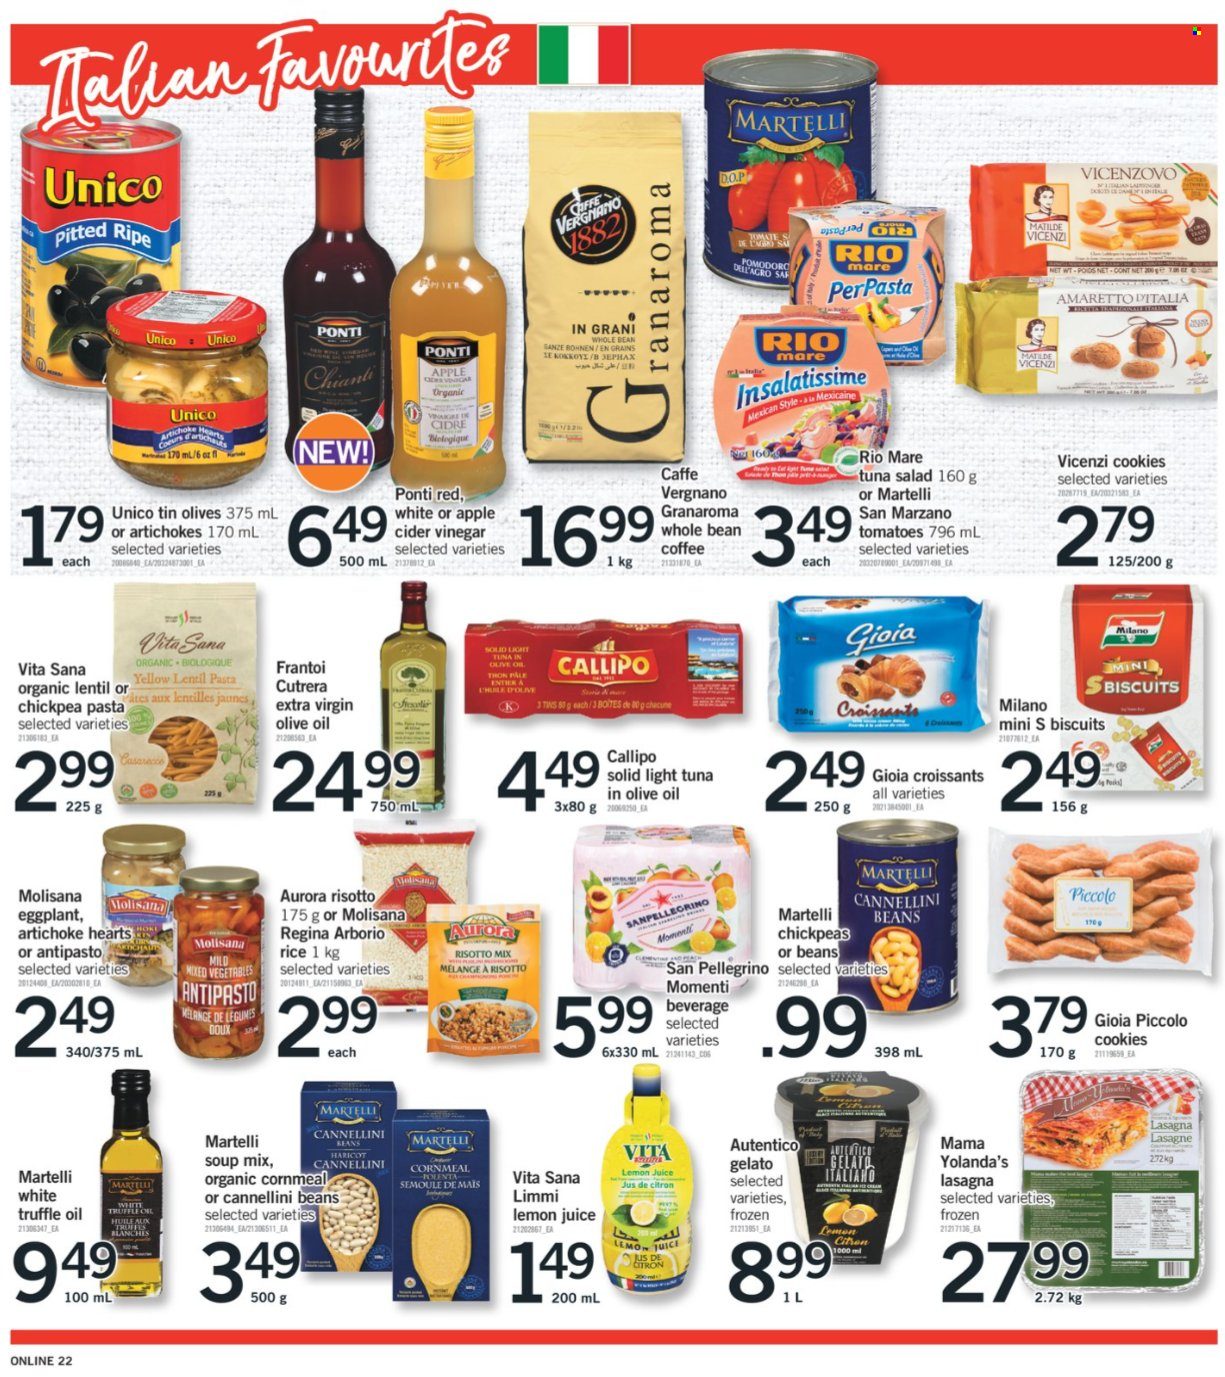 thumbnail - Fortinos Flyer - September 16, 2021 - September 22, 2021 - Sales products - croissant, artichoke, tomatoes, salad, eggplant, tuna, risotto, soup mix, soup, pasta, lasagna meal, tuna salad, gelato, cookies, biscuit, cannellini beans, light tuna, rice, chickpeas, apple cider vinegar, extra virgin olive oil, vinegar, San Pellegrino, lemon juice, coffee, Amaretto, olives. Page 14.